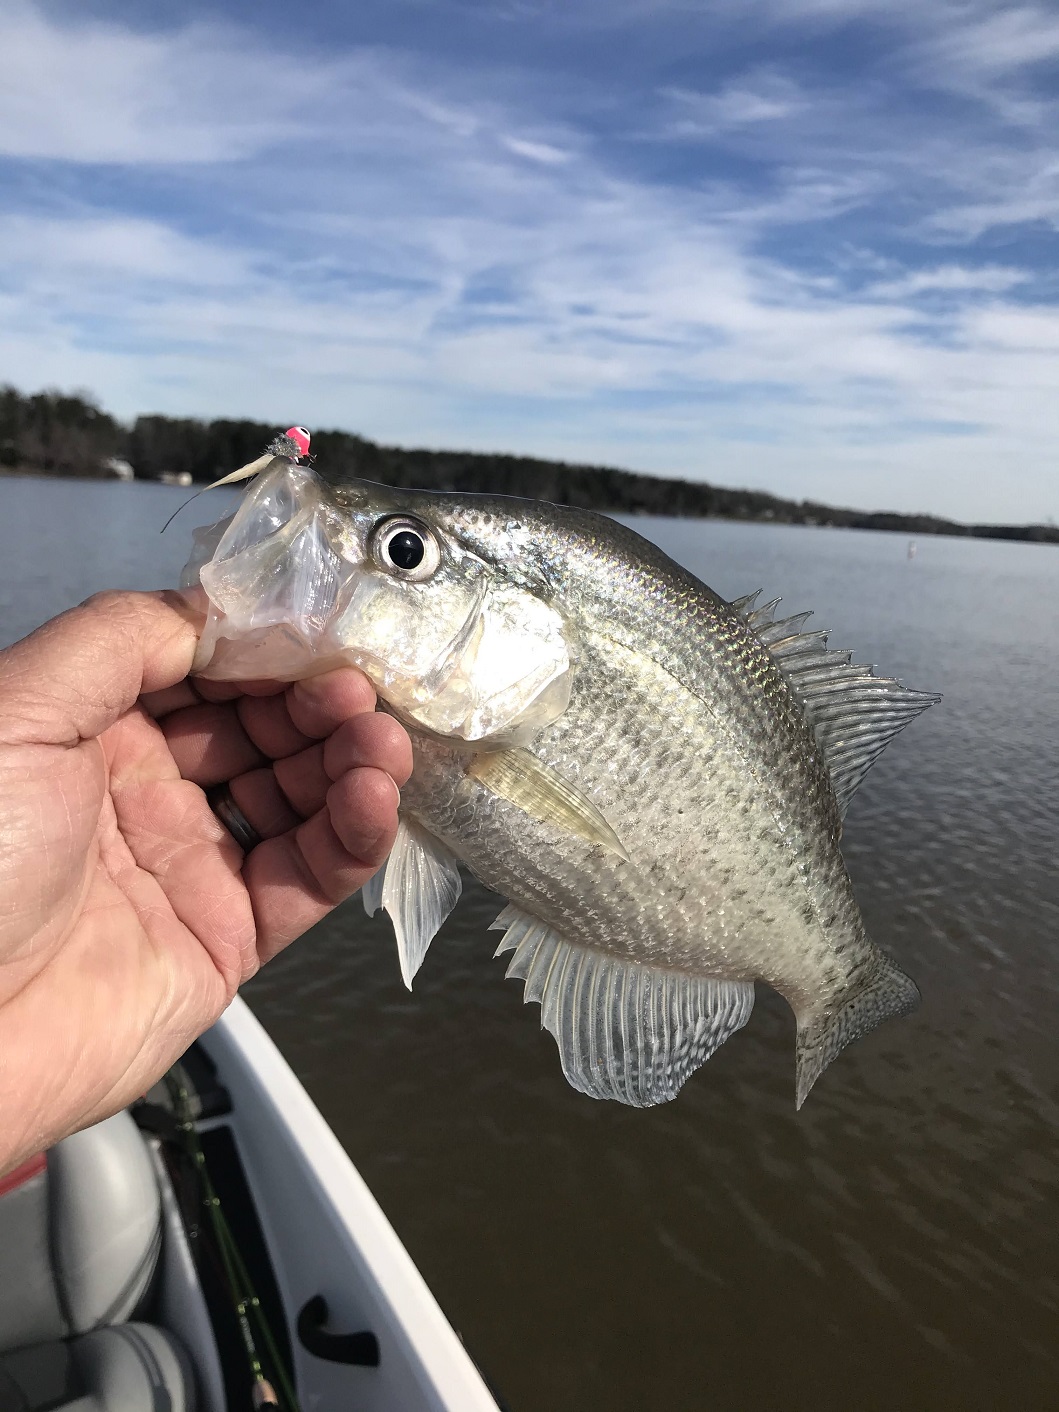 The Complete Guide To Vertical Jigging For Crappie – GassFishingStore